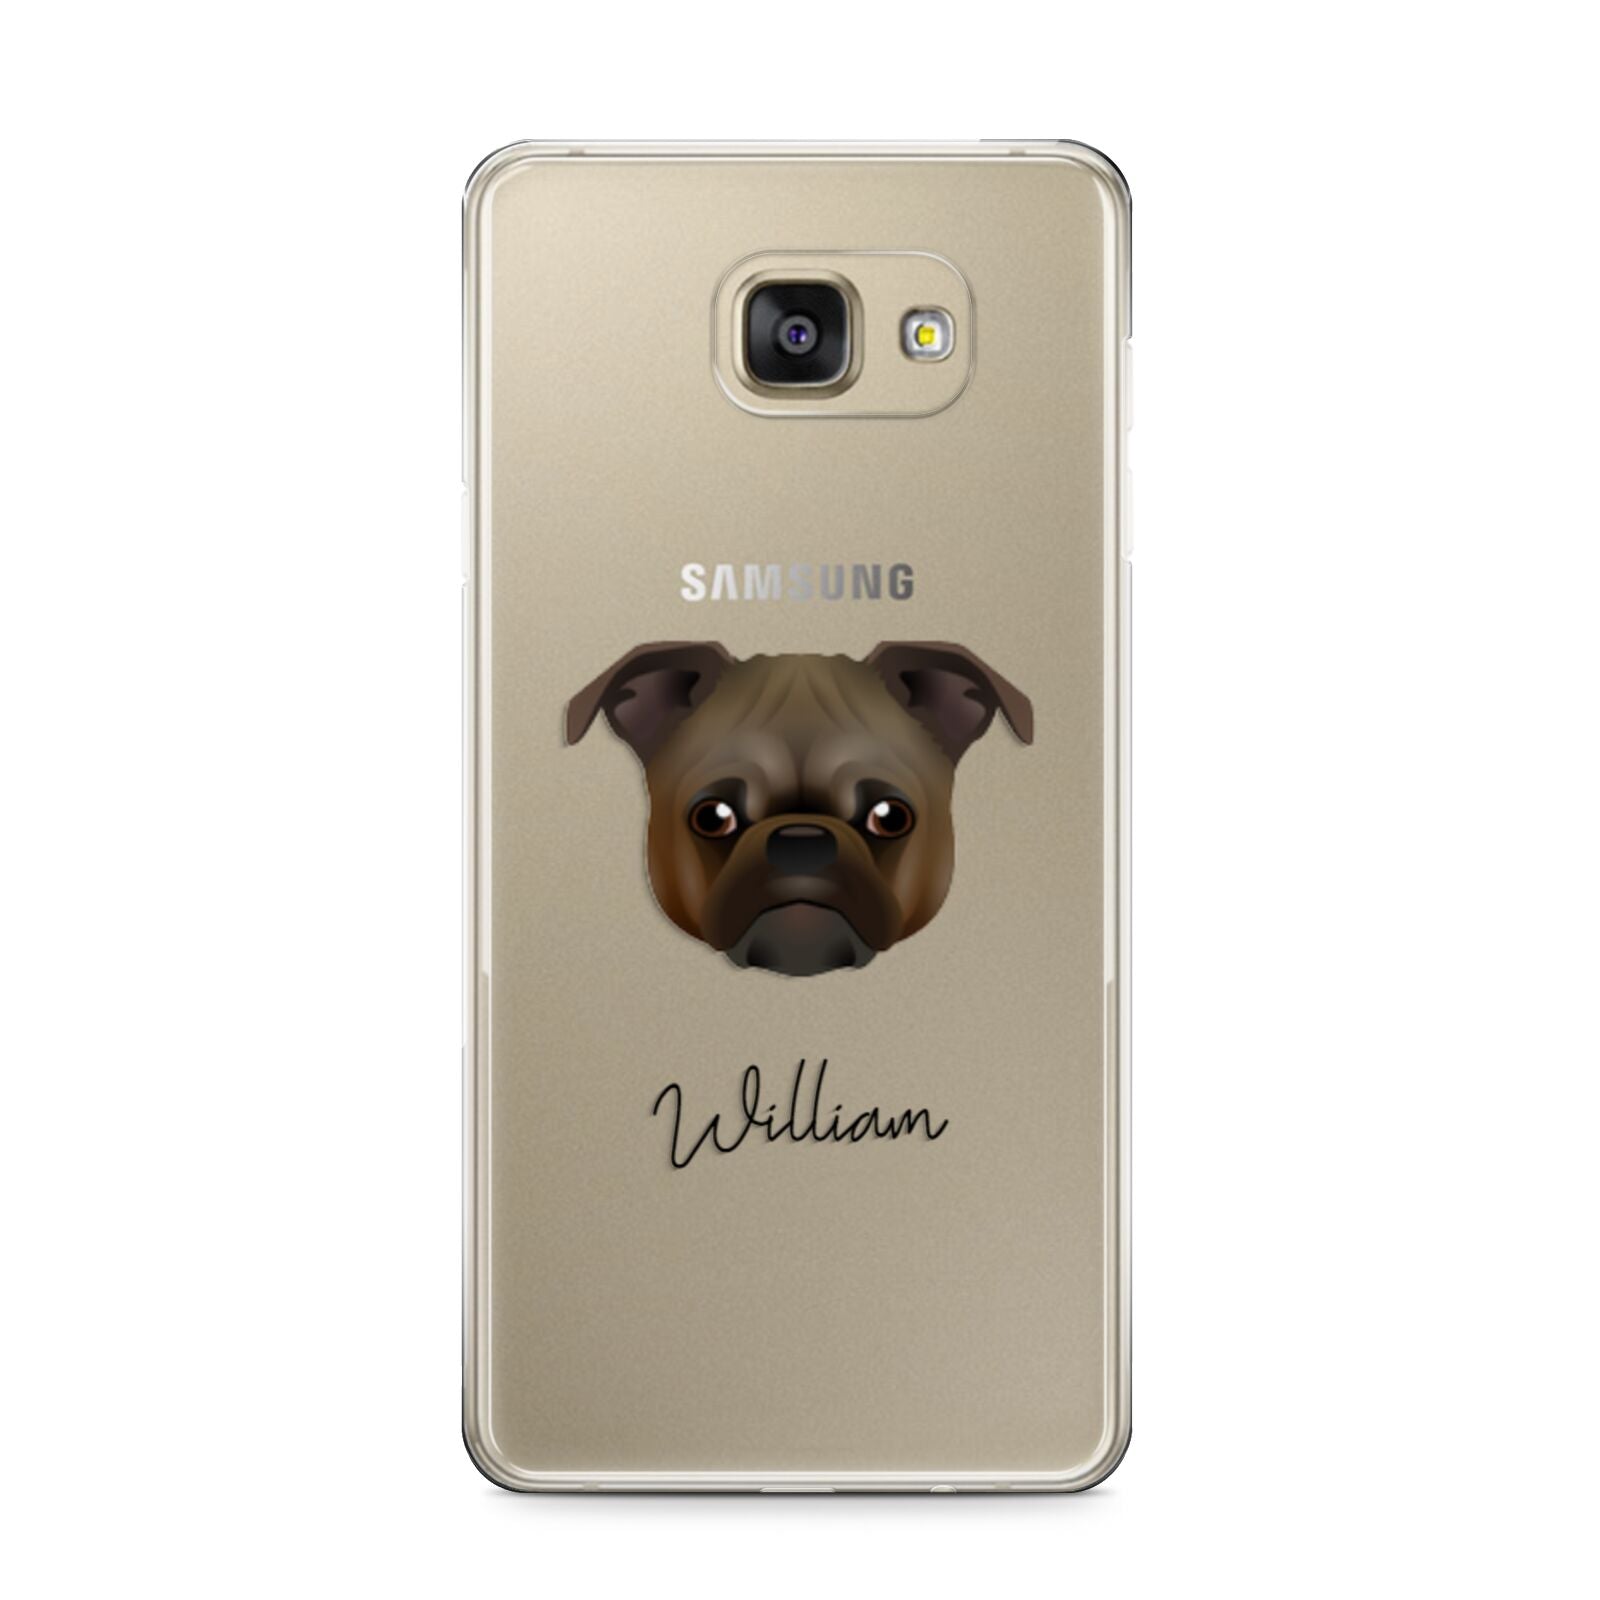 Chug Personalised Samsung Galaxy A9 2016 Case on gold phone